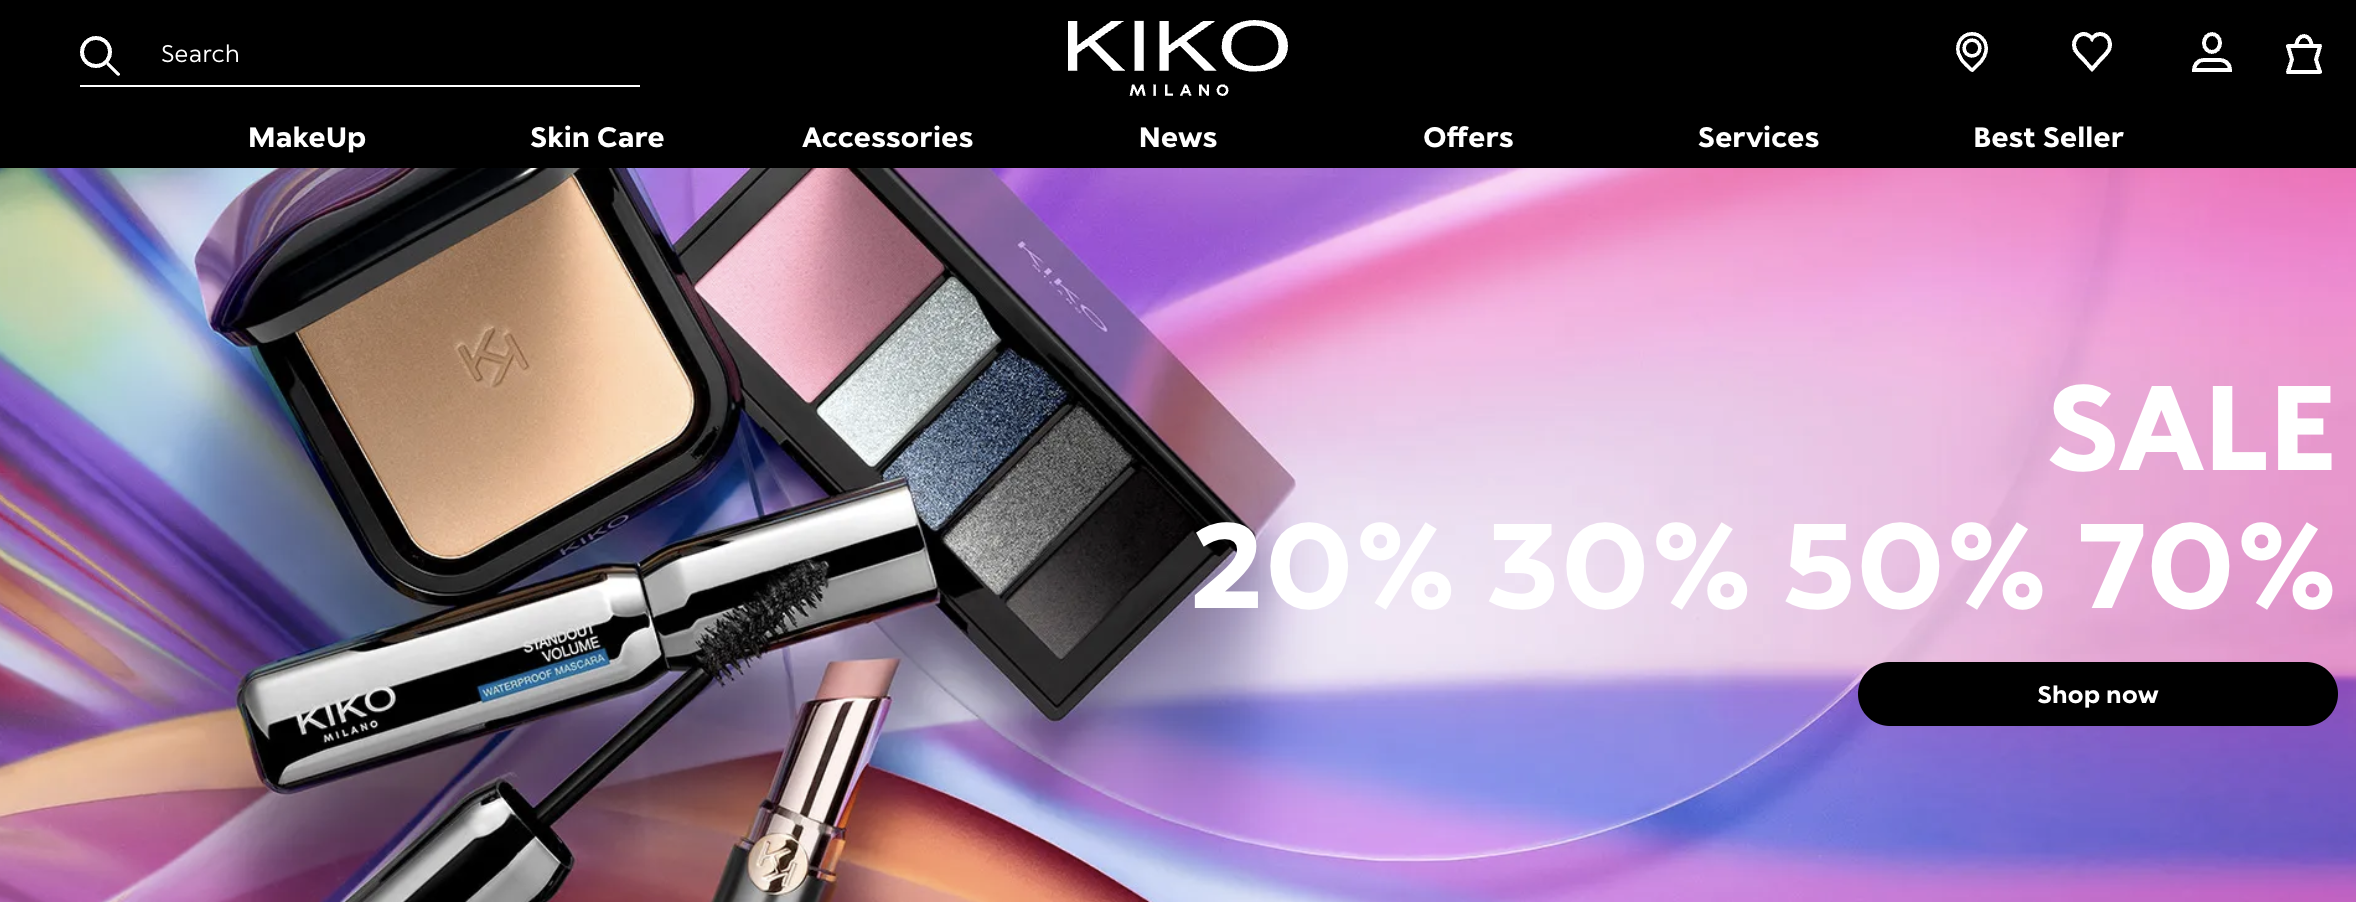 Kiko Milano Reports Record 2022 Revenue of 671 Million Euros, Growing by 42% and Profiting by 350%